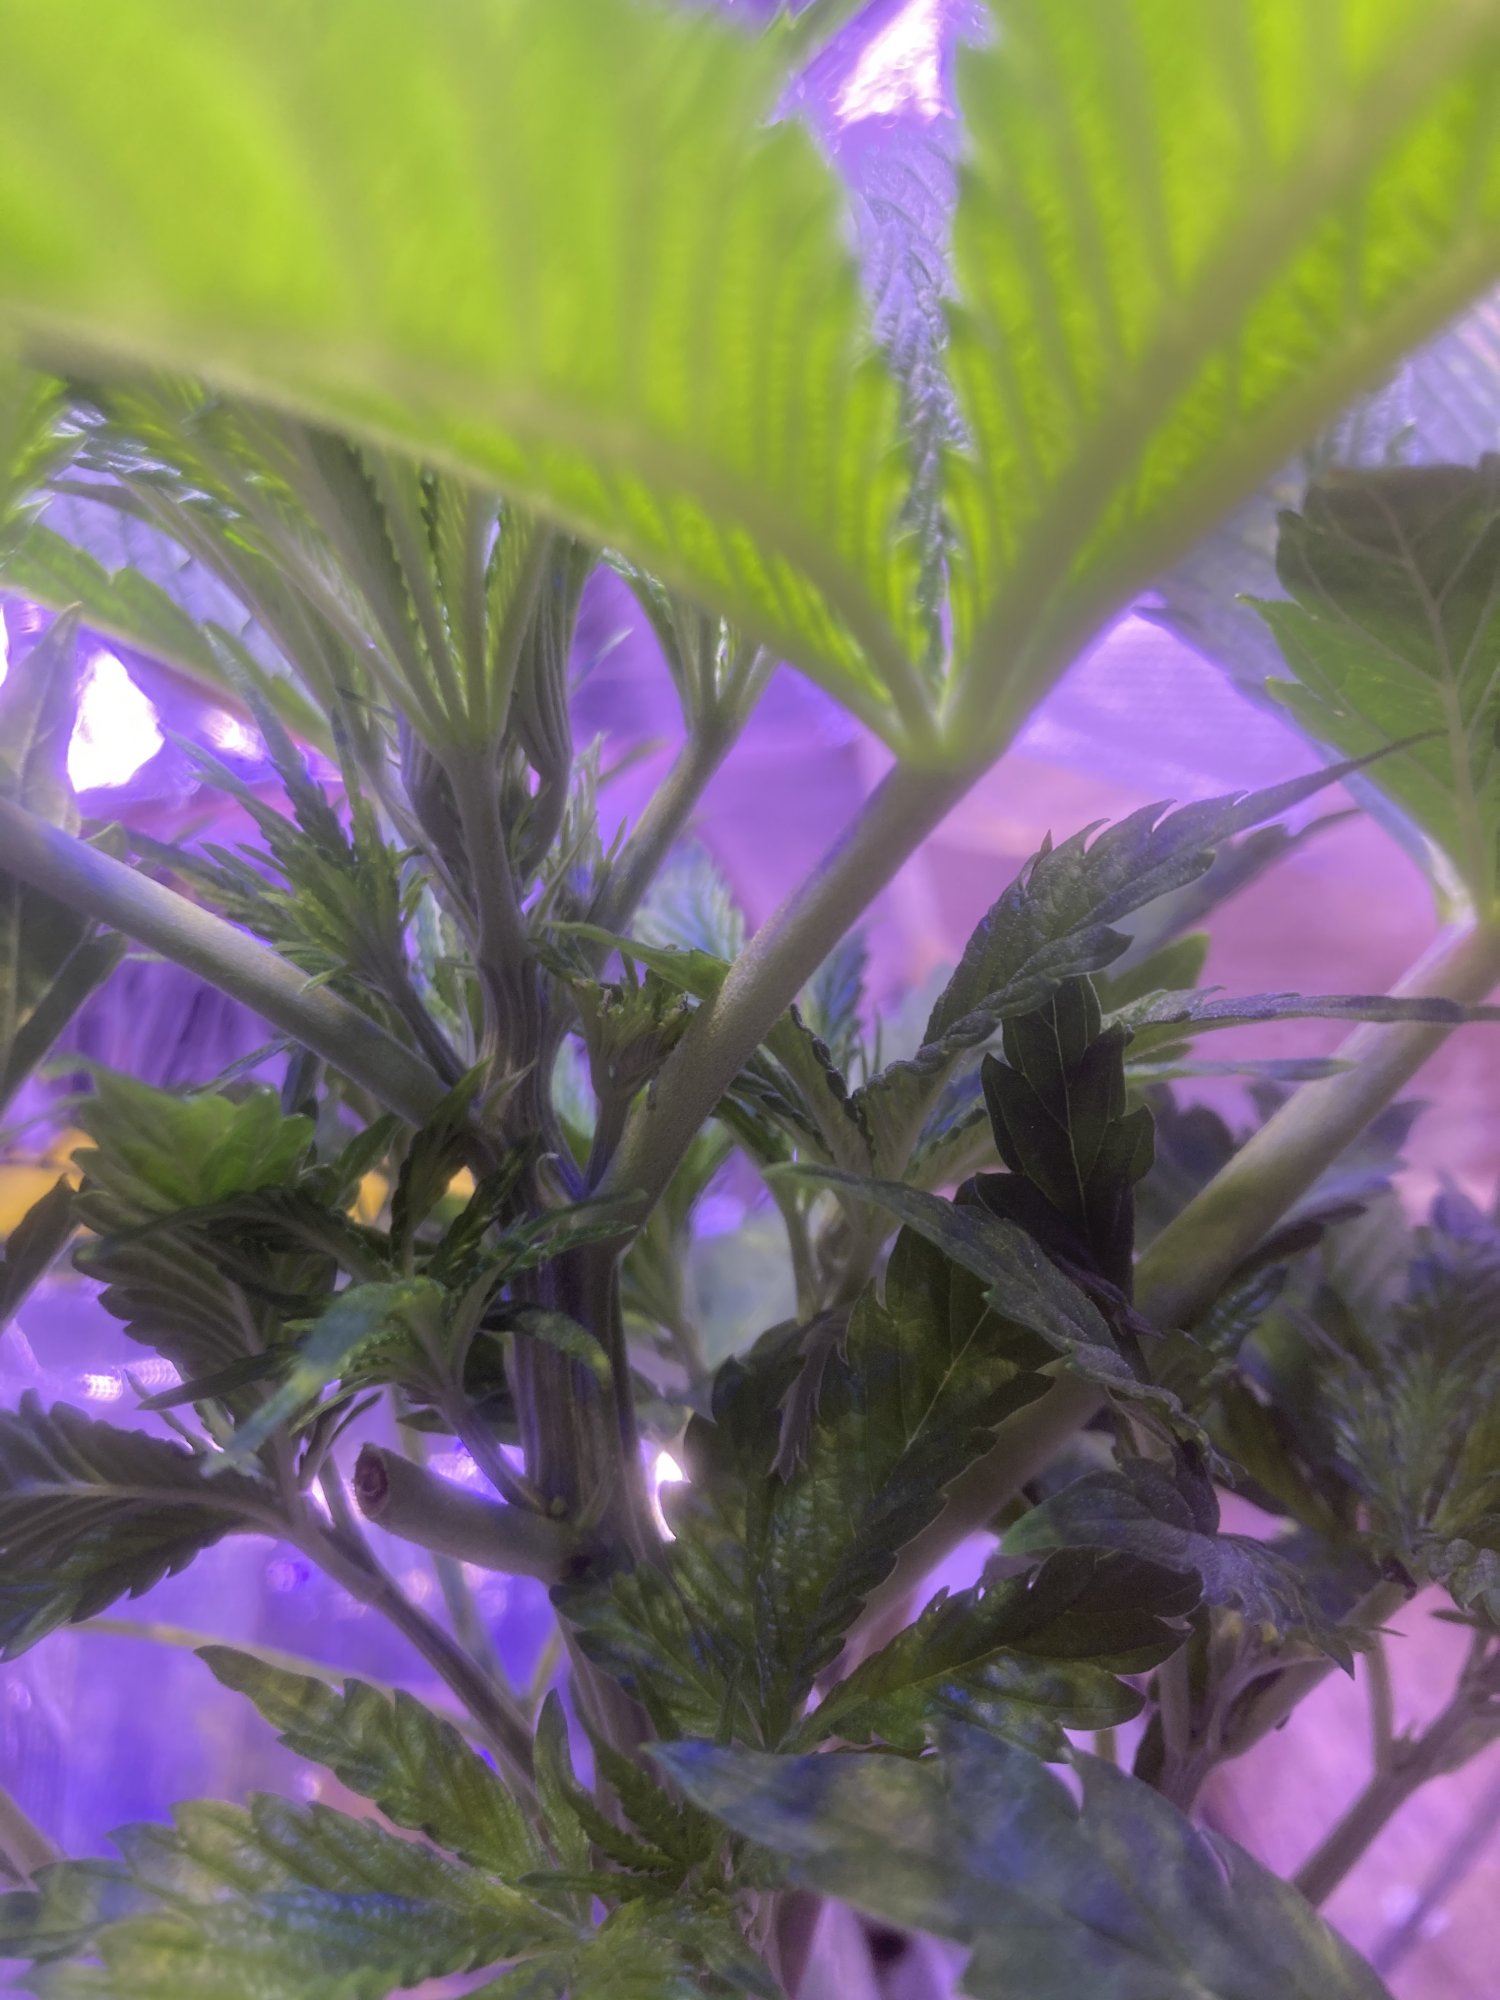 Root rot issues may have turned plant 2